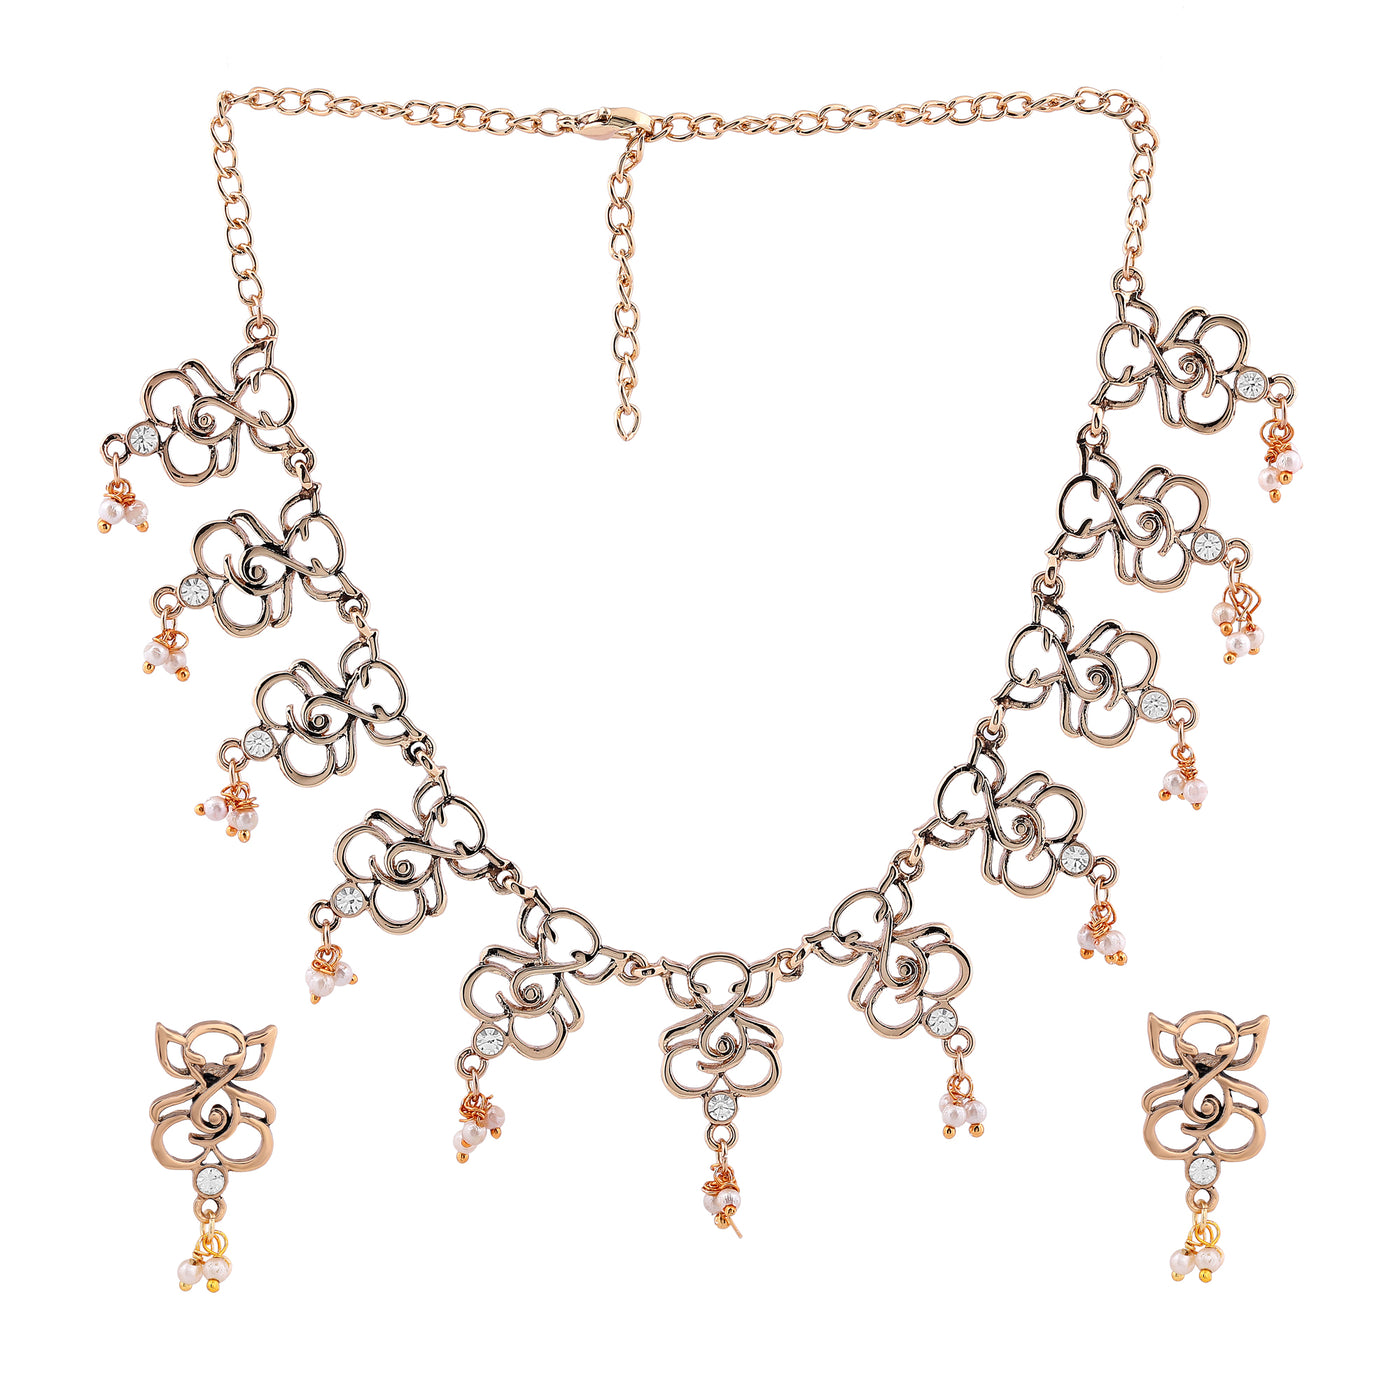 Estele Gold Plated Antique Amore Ganesh Textured Necklace Set with Austrian Crystals & Golden Pearls for Women